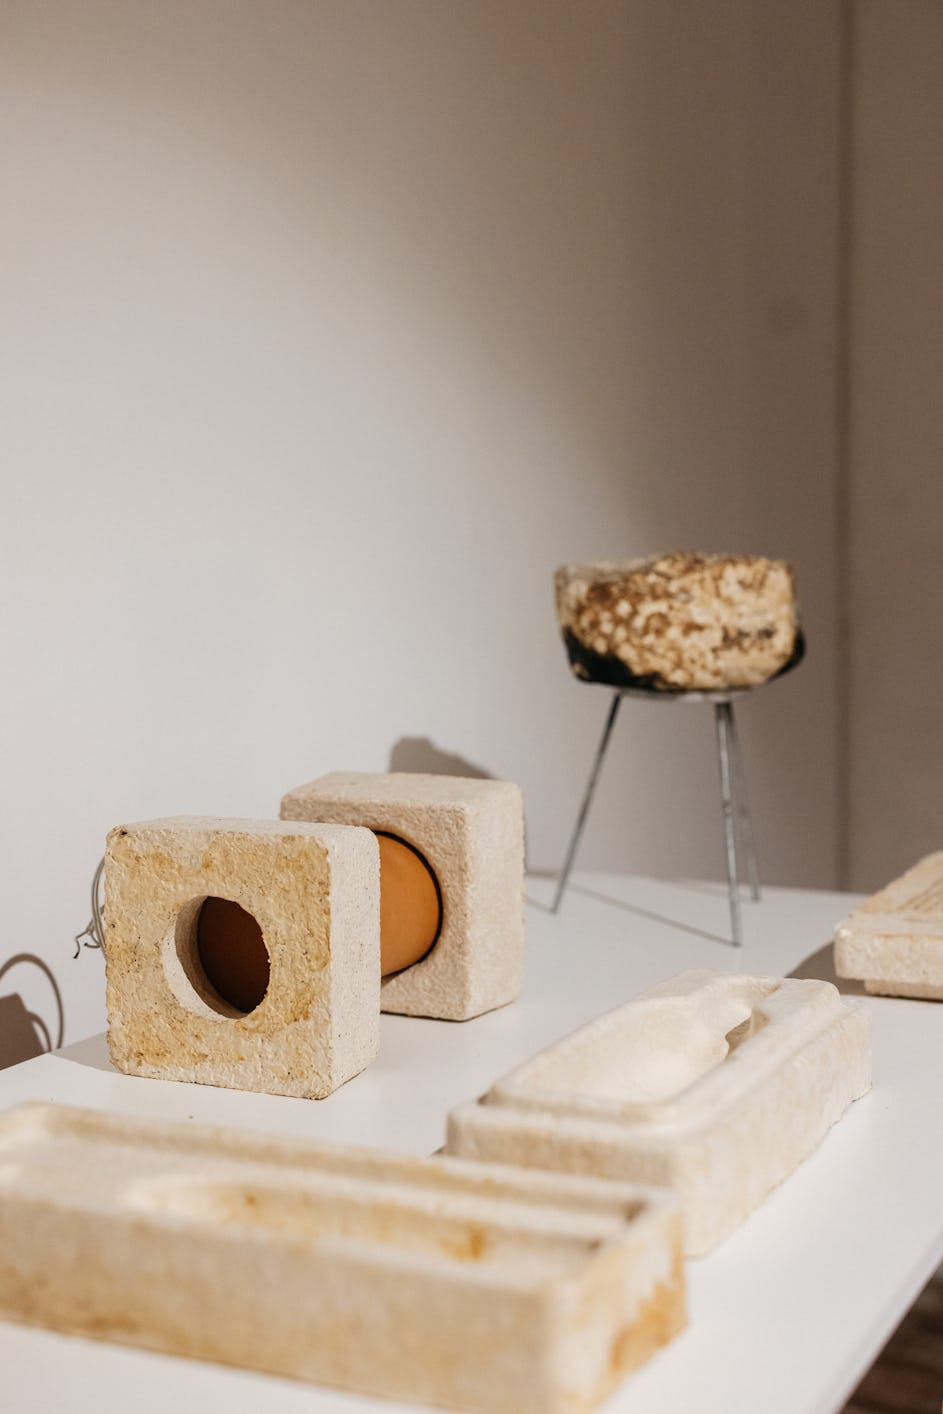 Products made of mycelium. Image source: Marie-Luise Skibbe